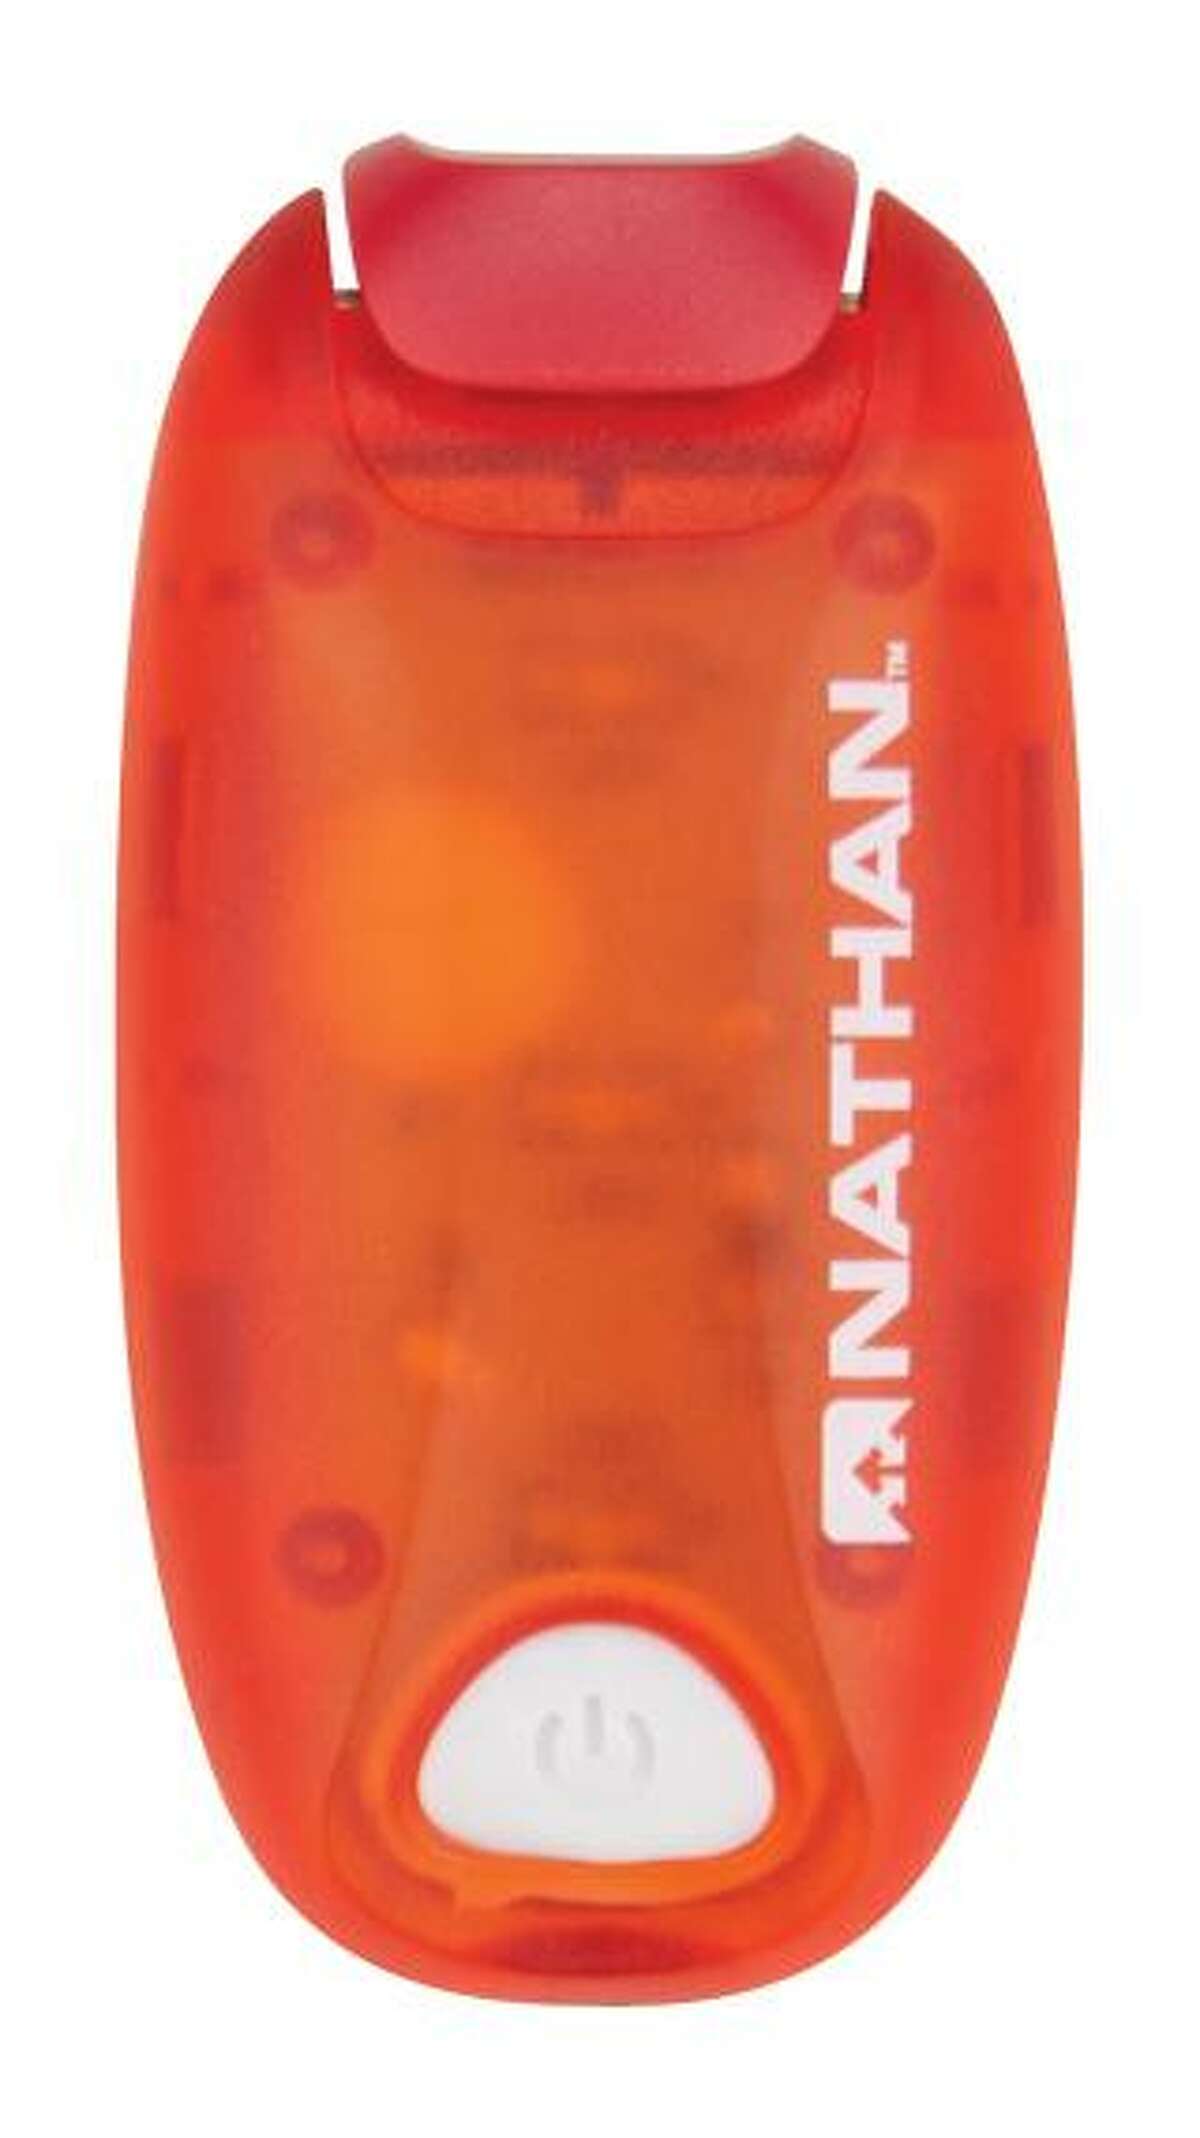 This LED strobe light ideal for runners and cyclists is a great find for $10. Find it at Nathan Sports.